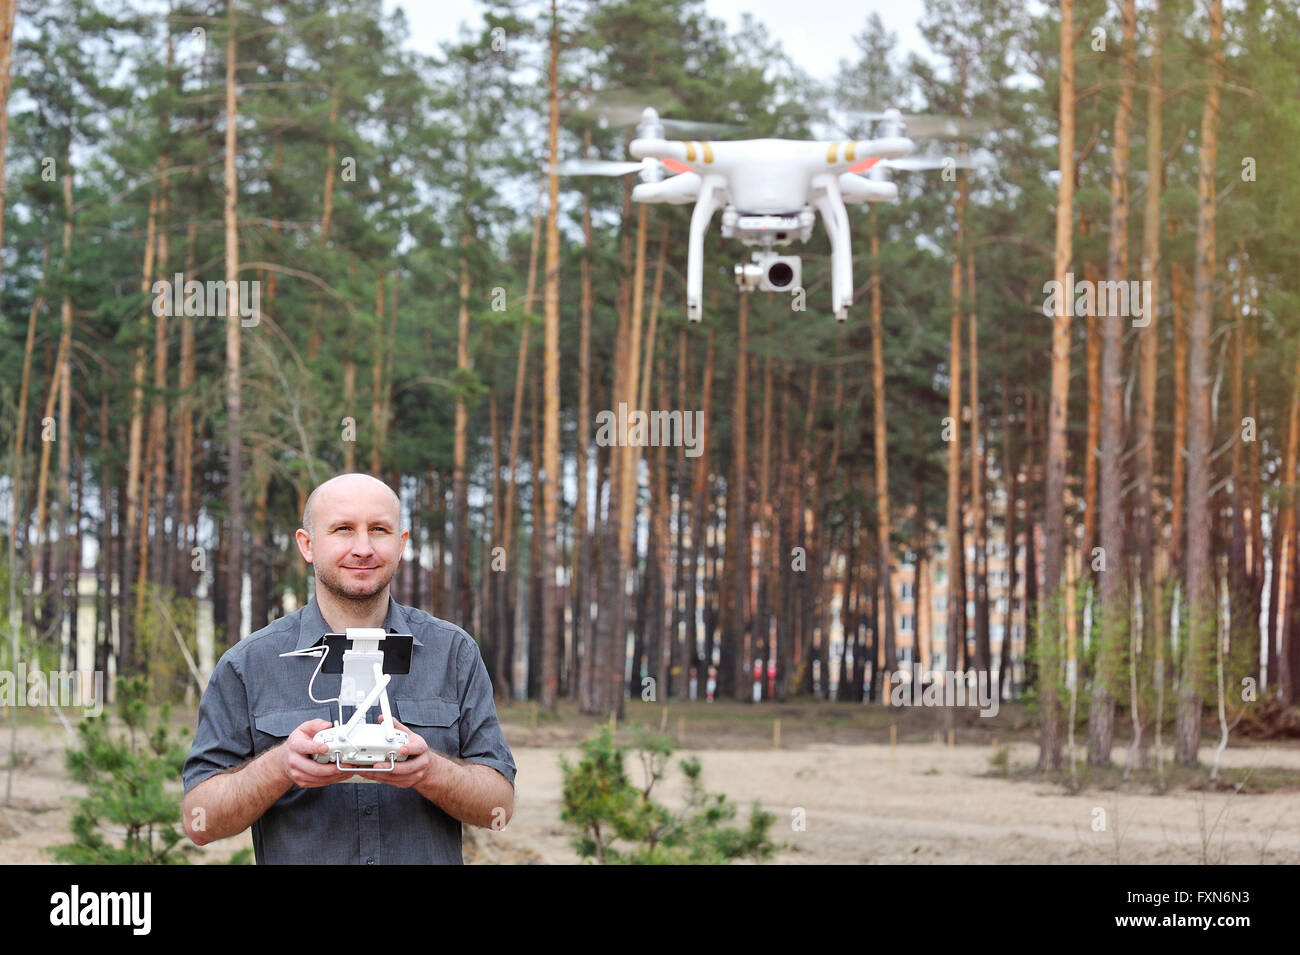 Man using his drone outdoor with forest background Stock Photo